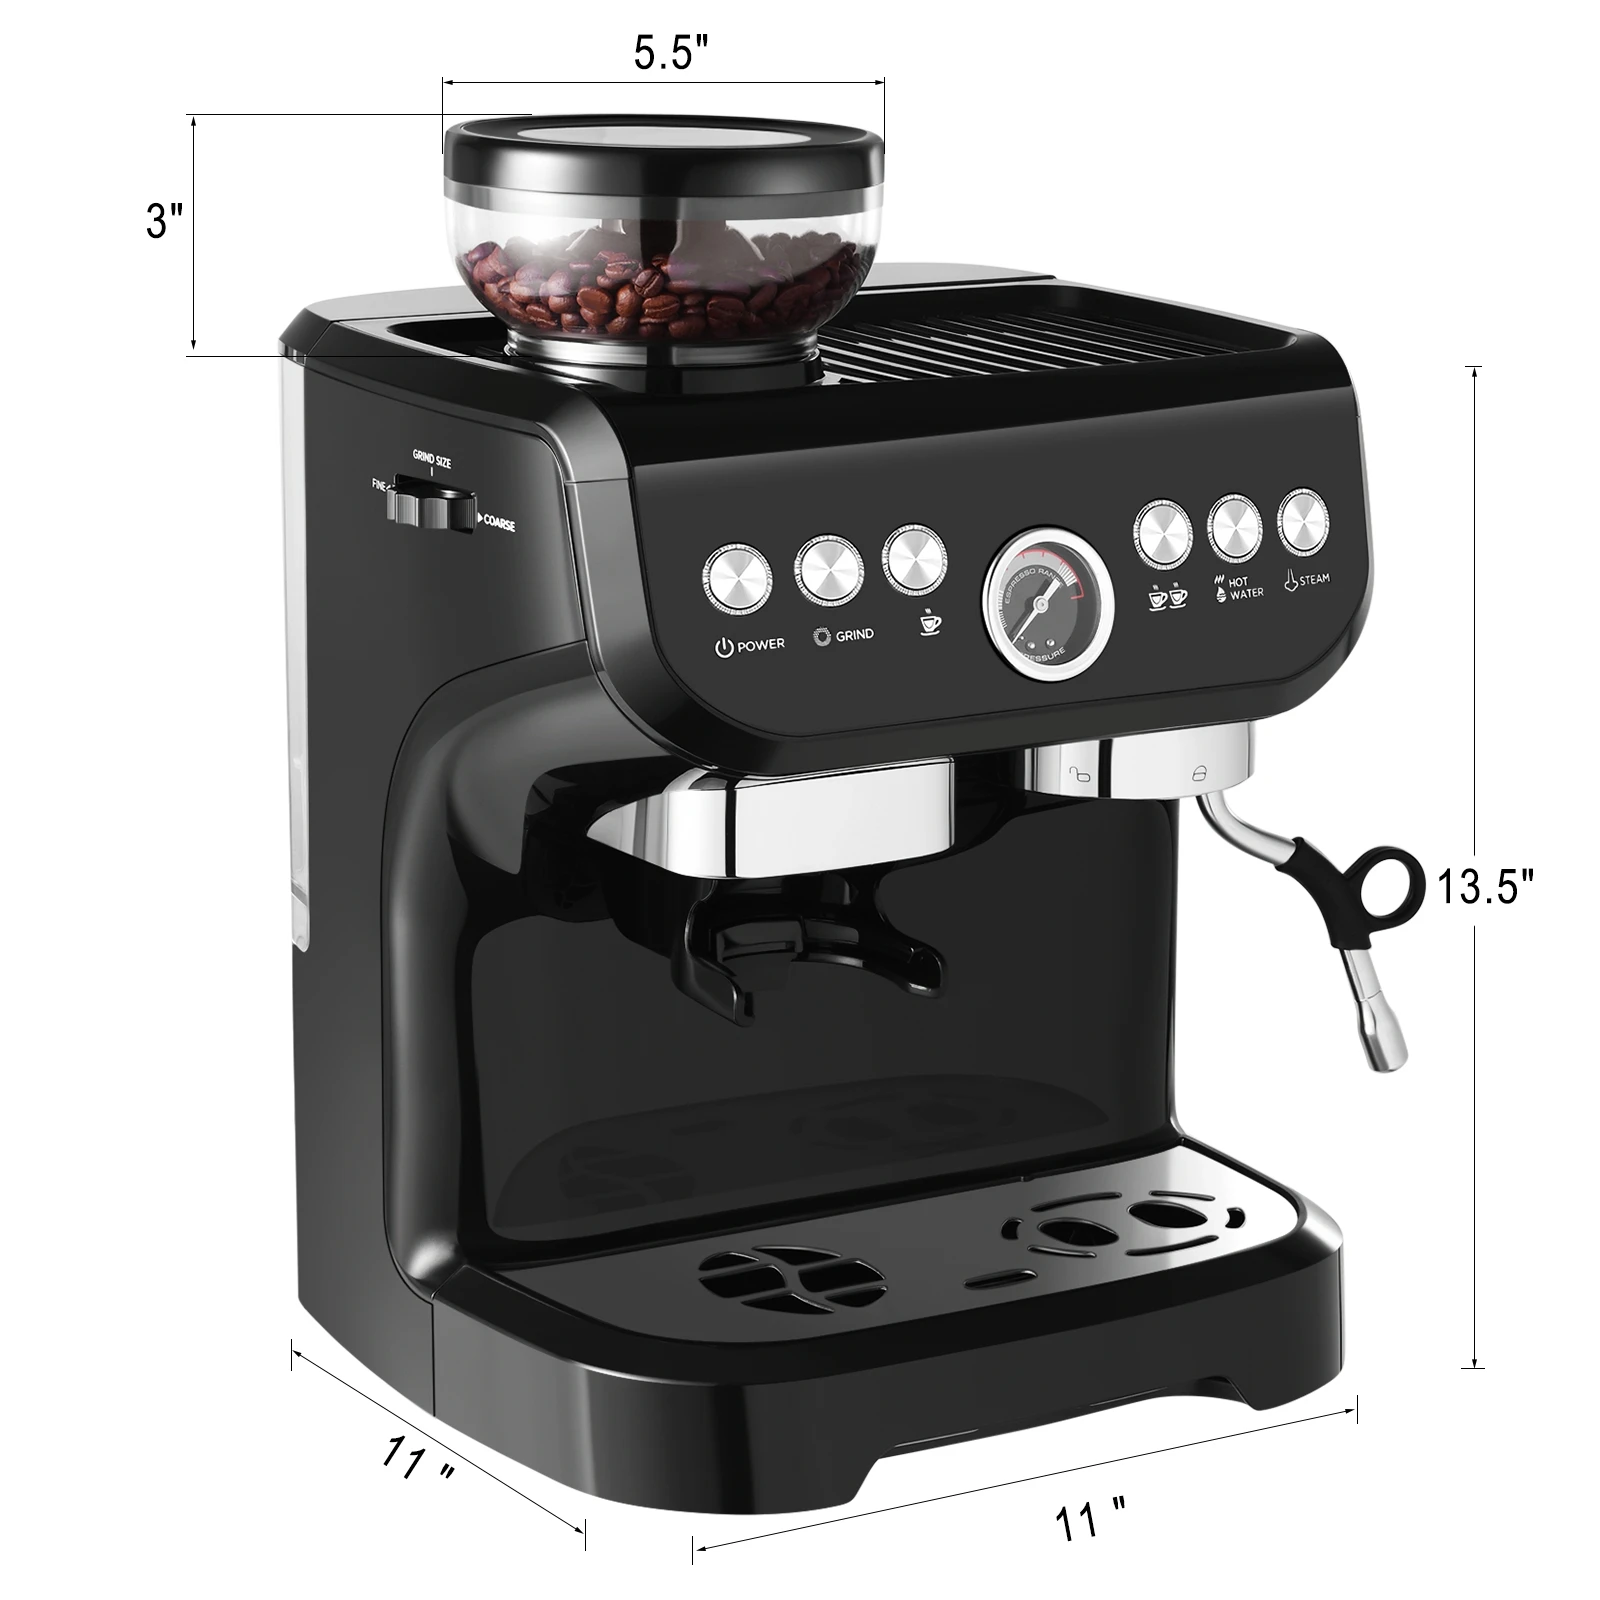 

Grinder Coffee Machine With Milk Frother Maquina de cafe expreso Espresso Professional Automatic Expresso Coffee Machine Maker